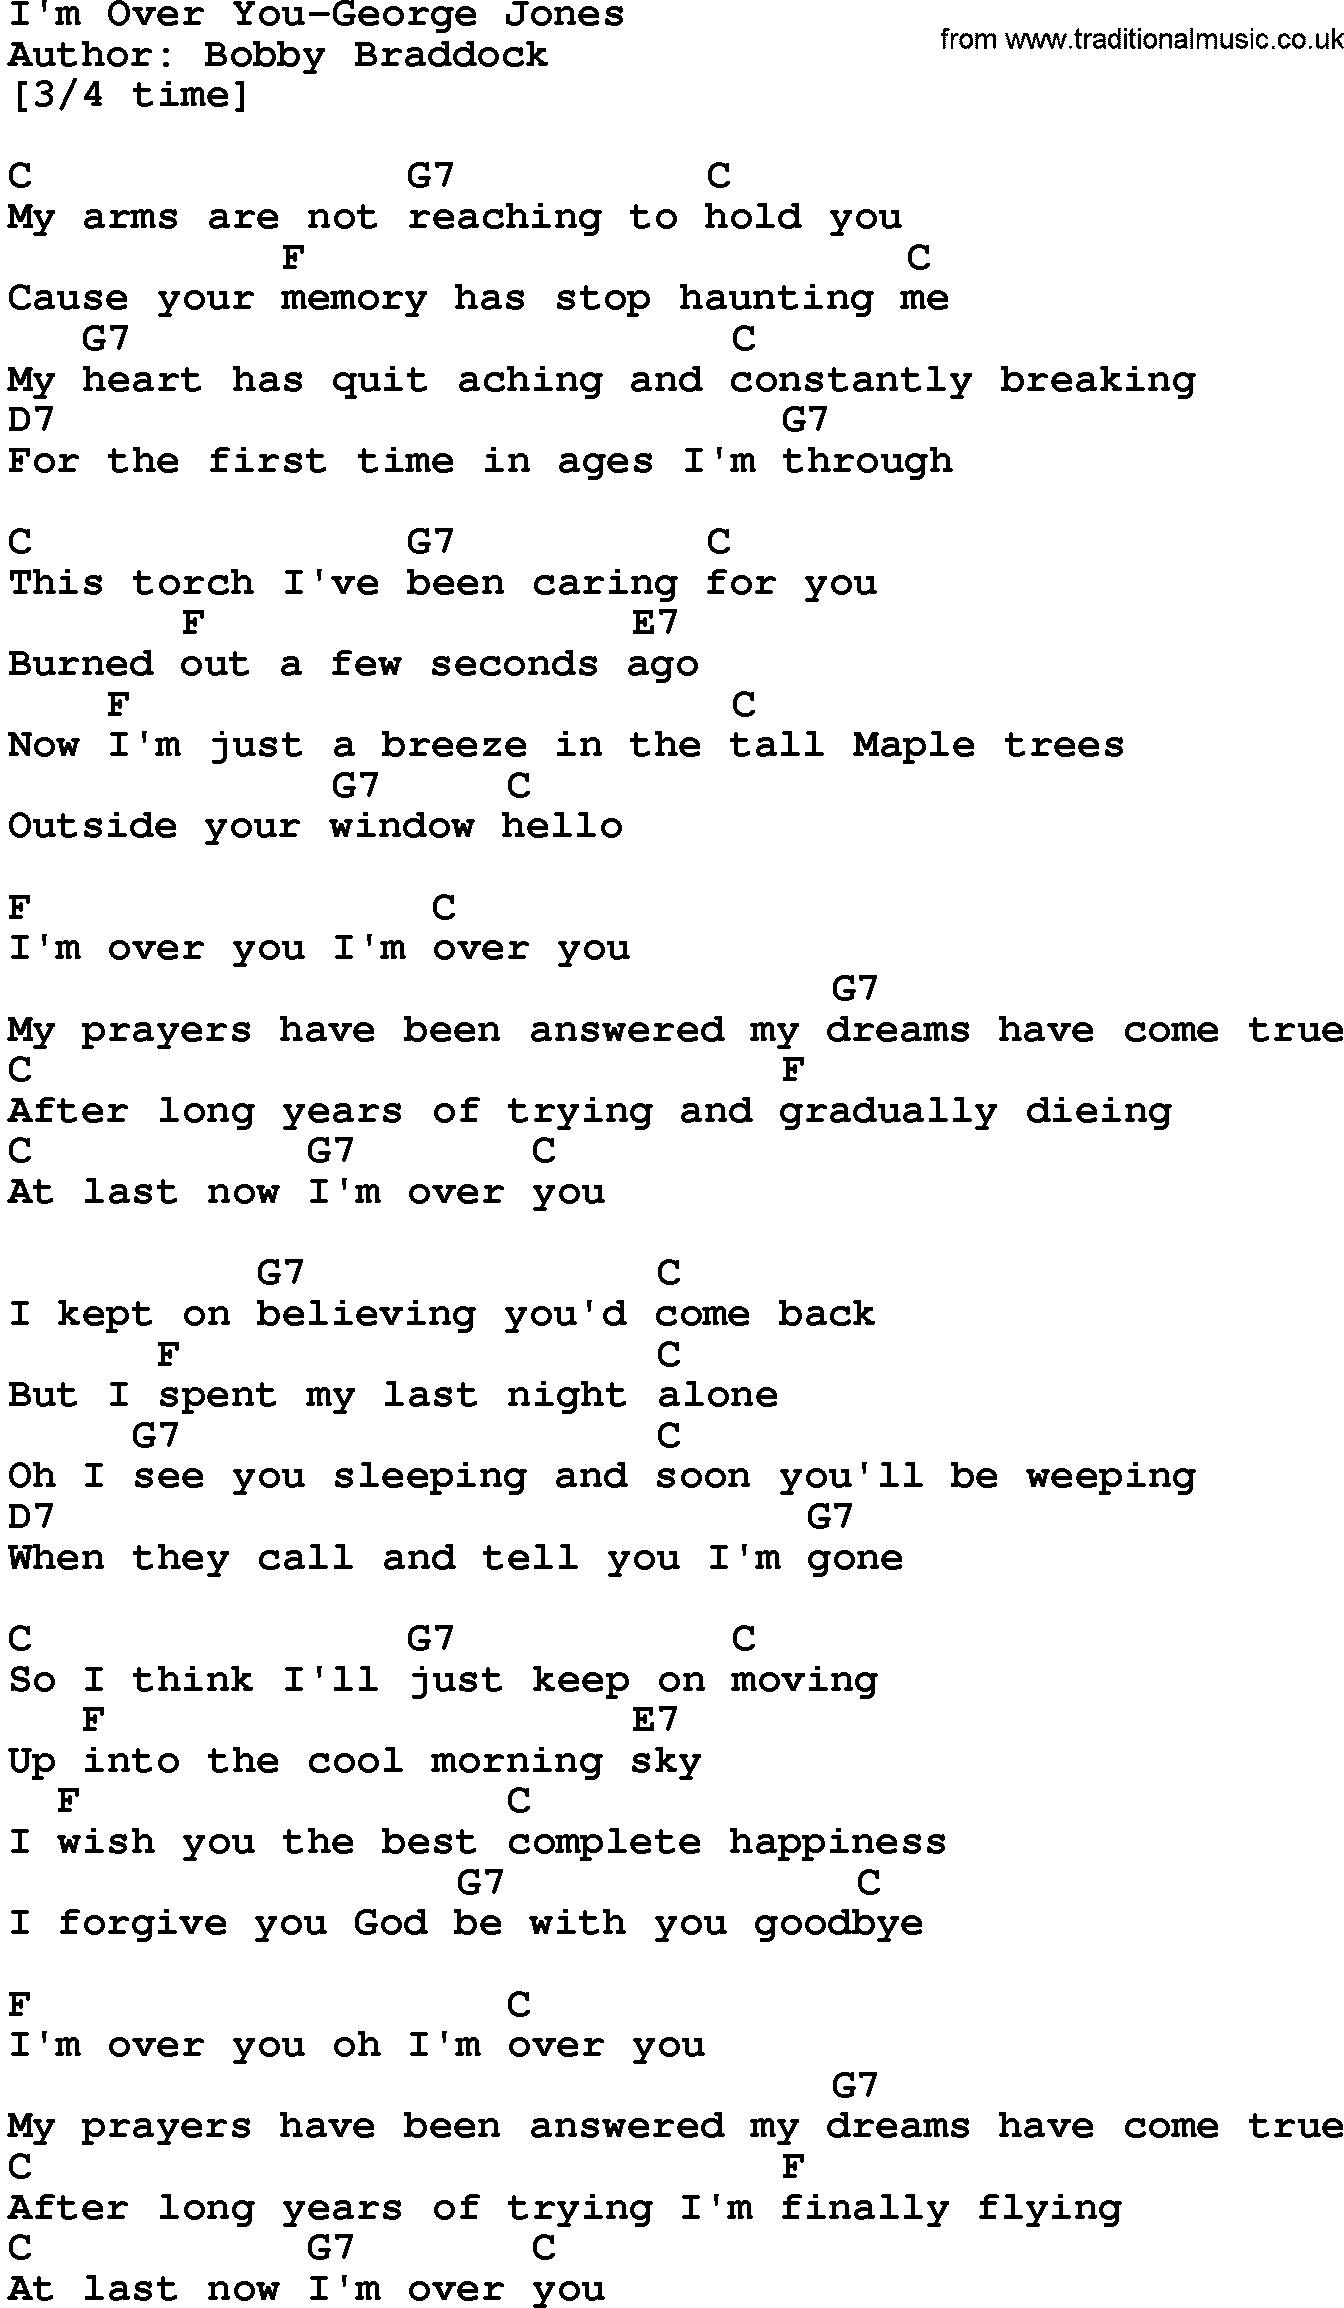 Country music song: I'm Over You-George Jones lyrics and chords